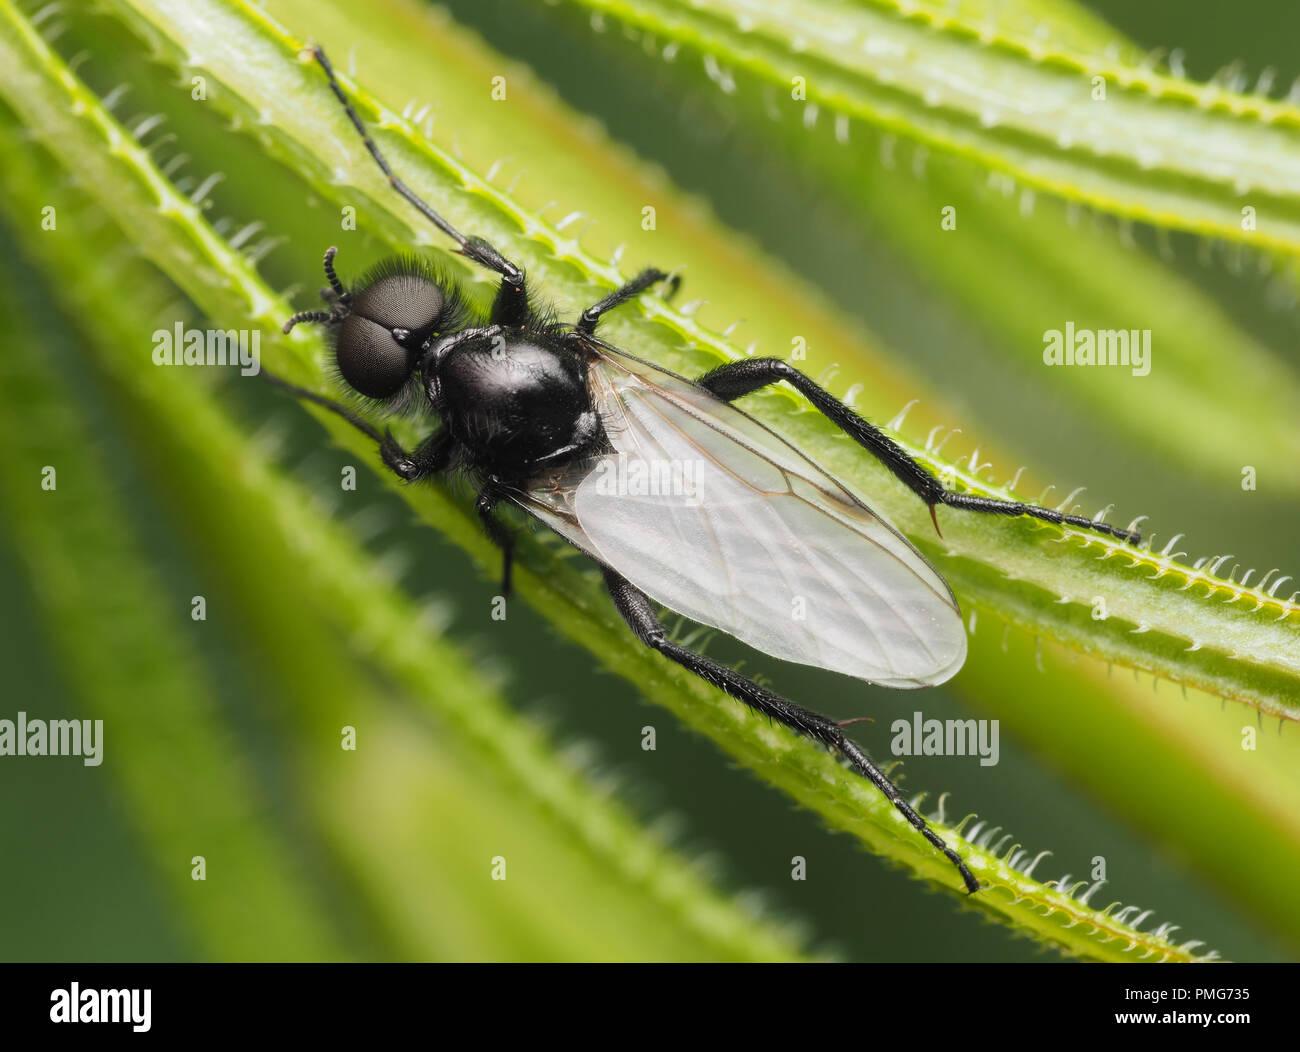 Dorsal view of male St Marks fly (Bibio marci) resting on plant. Tipperary, Ireland Stock Photo